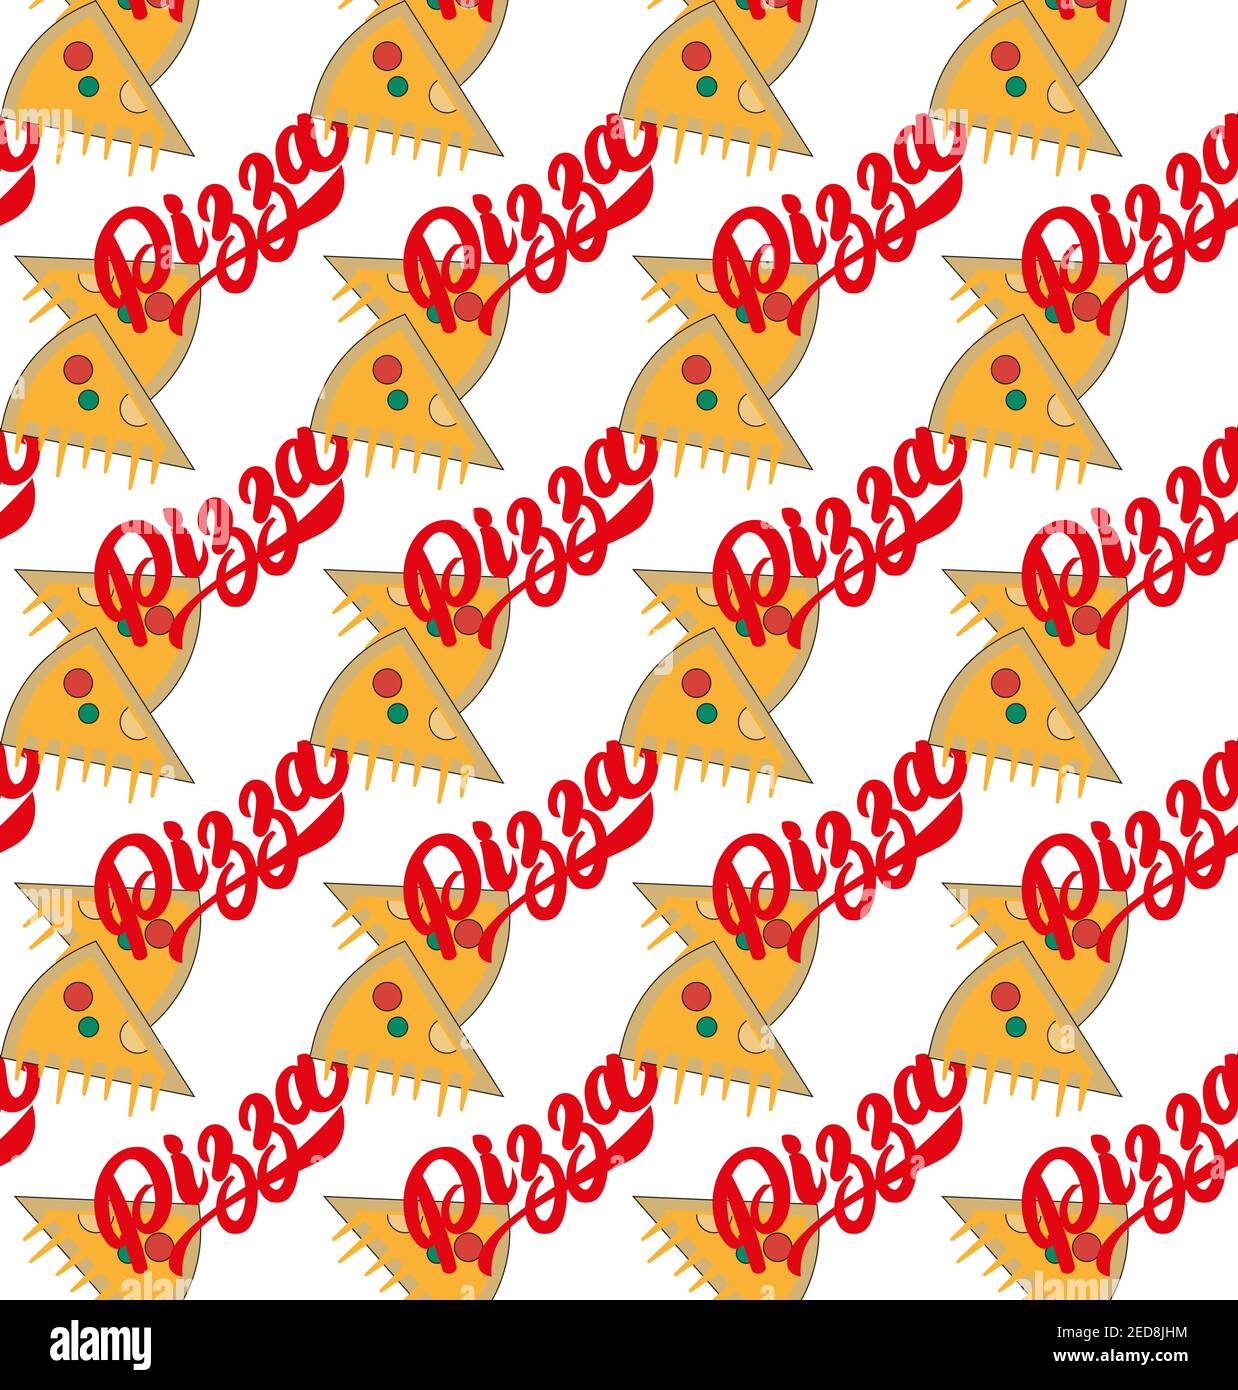 Pizza seamless vector repeating pattern with text and pizza slices Stock Vector